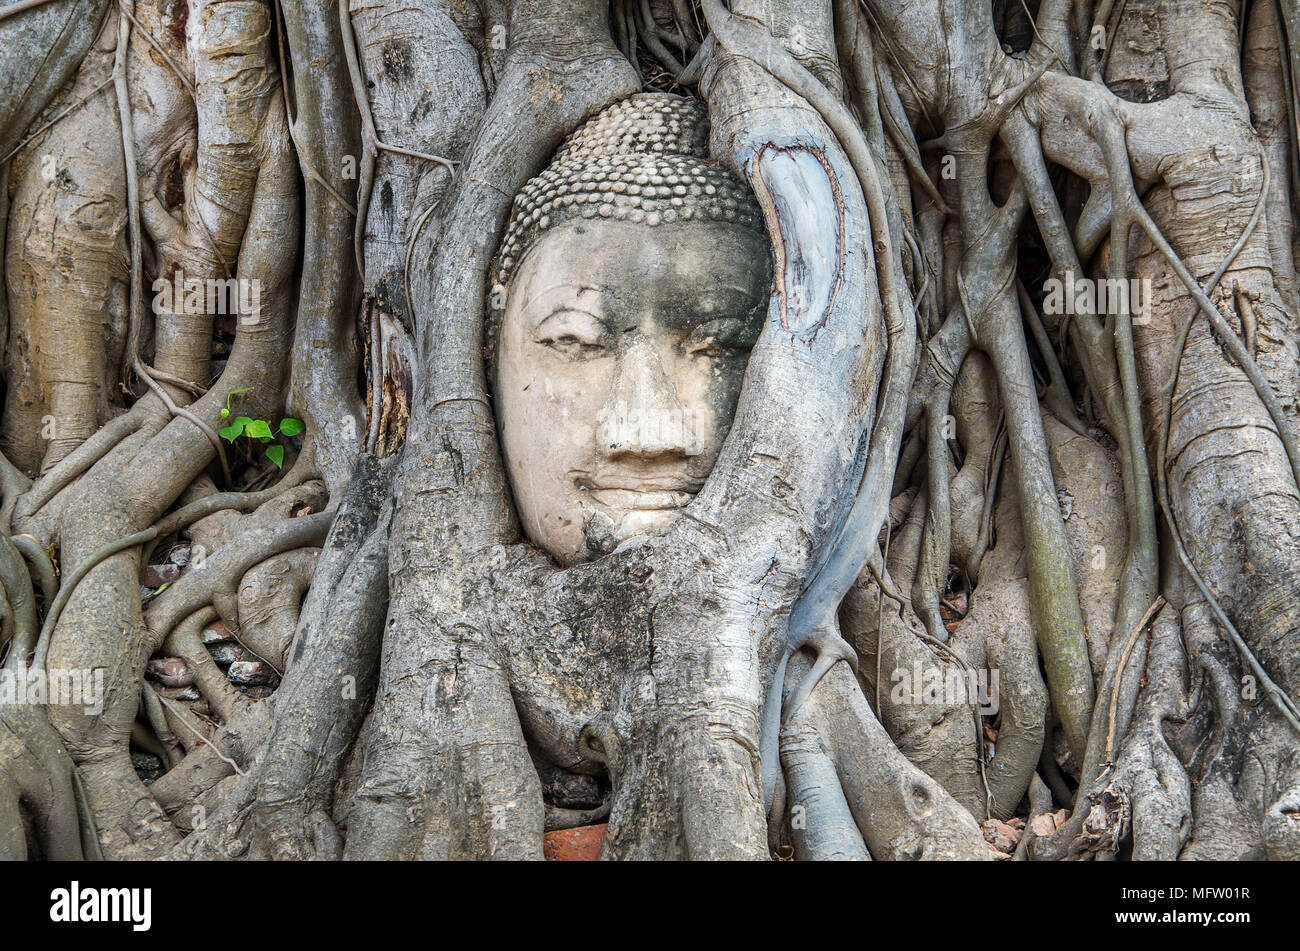 Head of the Buddha The root of the tree is amazing in Thailand. Bodhi Tree roots at Wat Maha That Ayutthaya Stock Photo